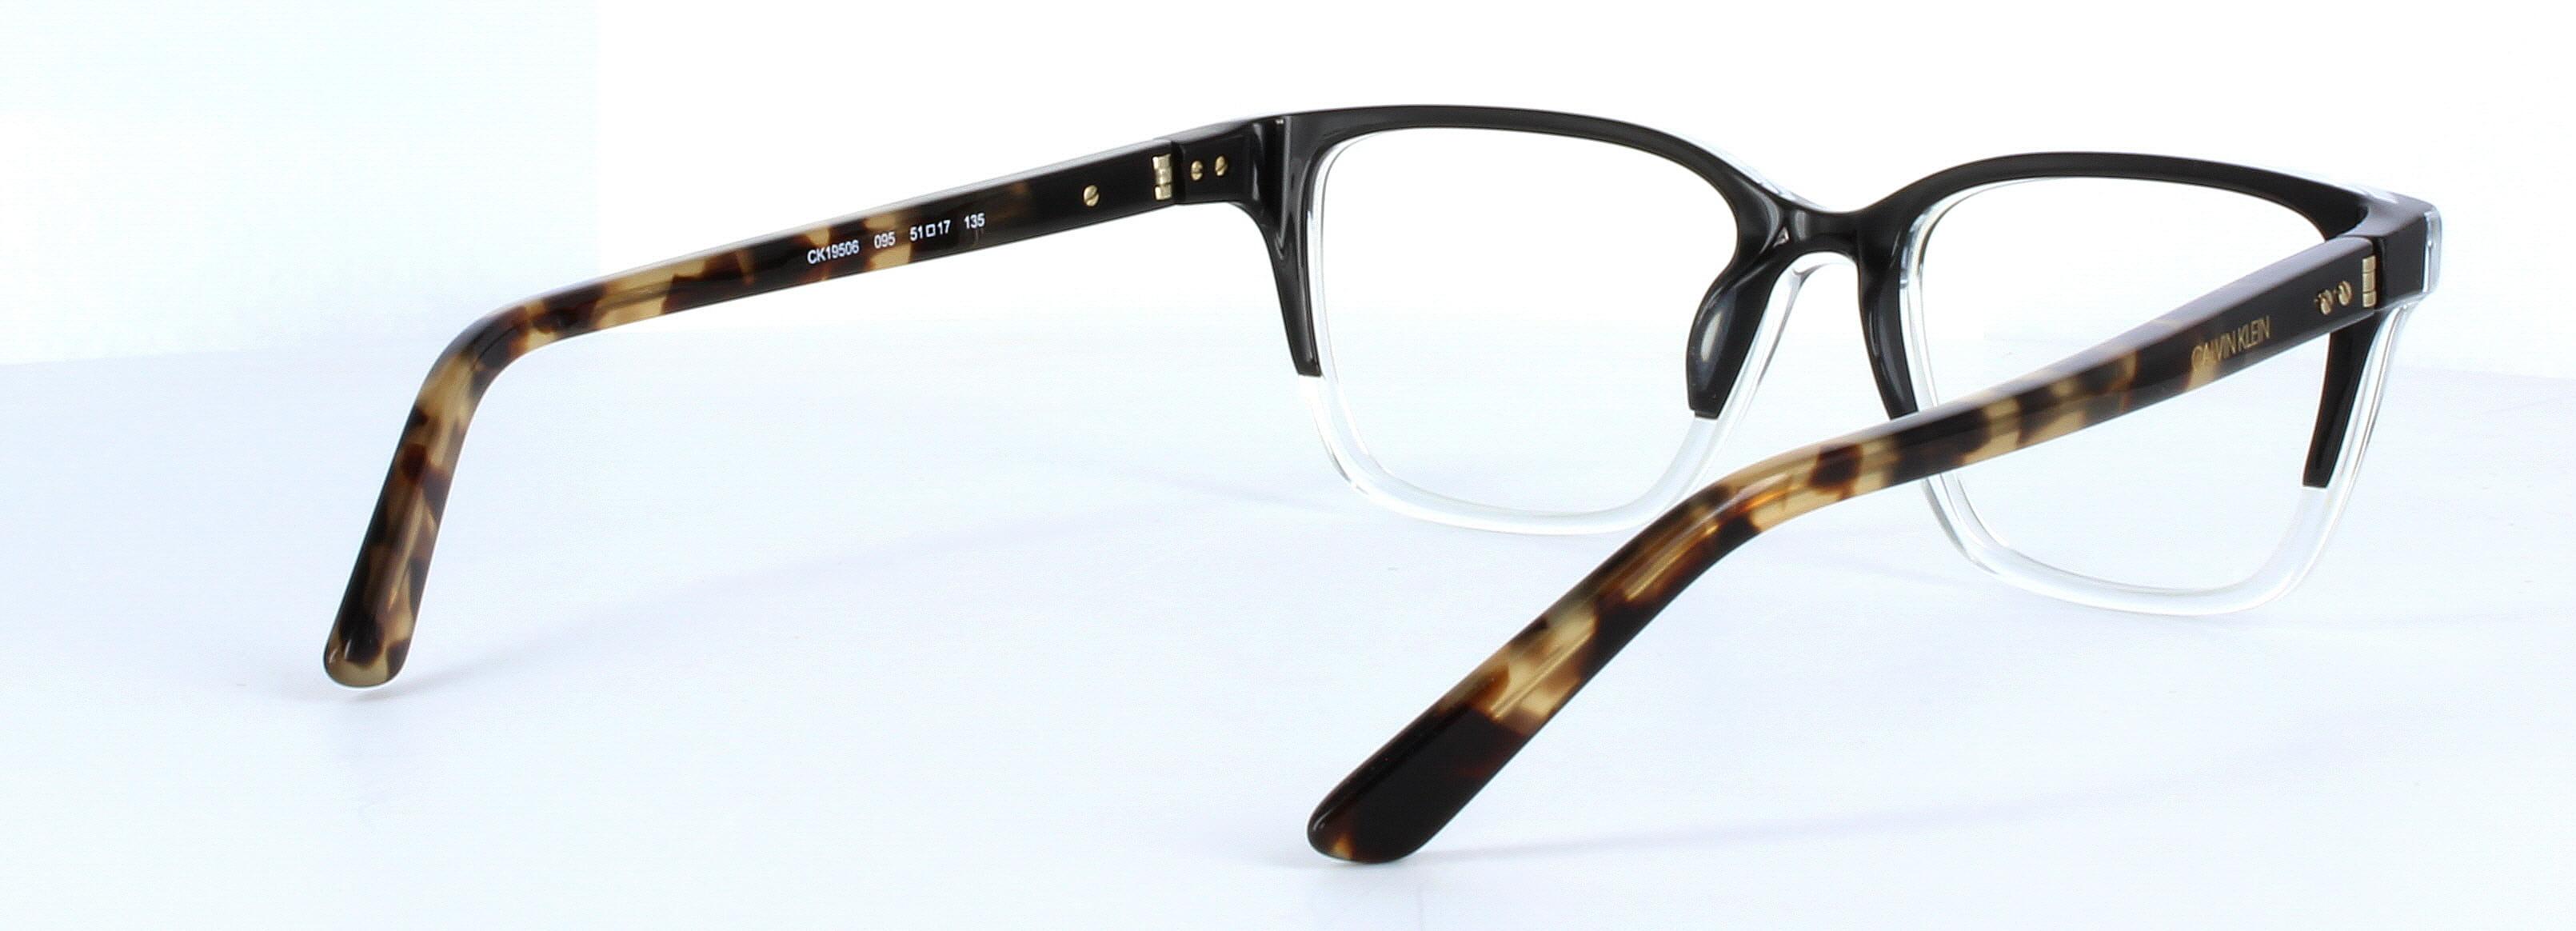 CK19506-095 - Unisex 2-tone acetate glasses with spring hinged arms - Black & crystal - image view 4